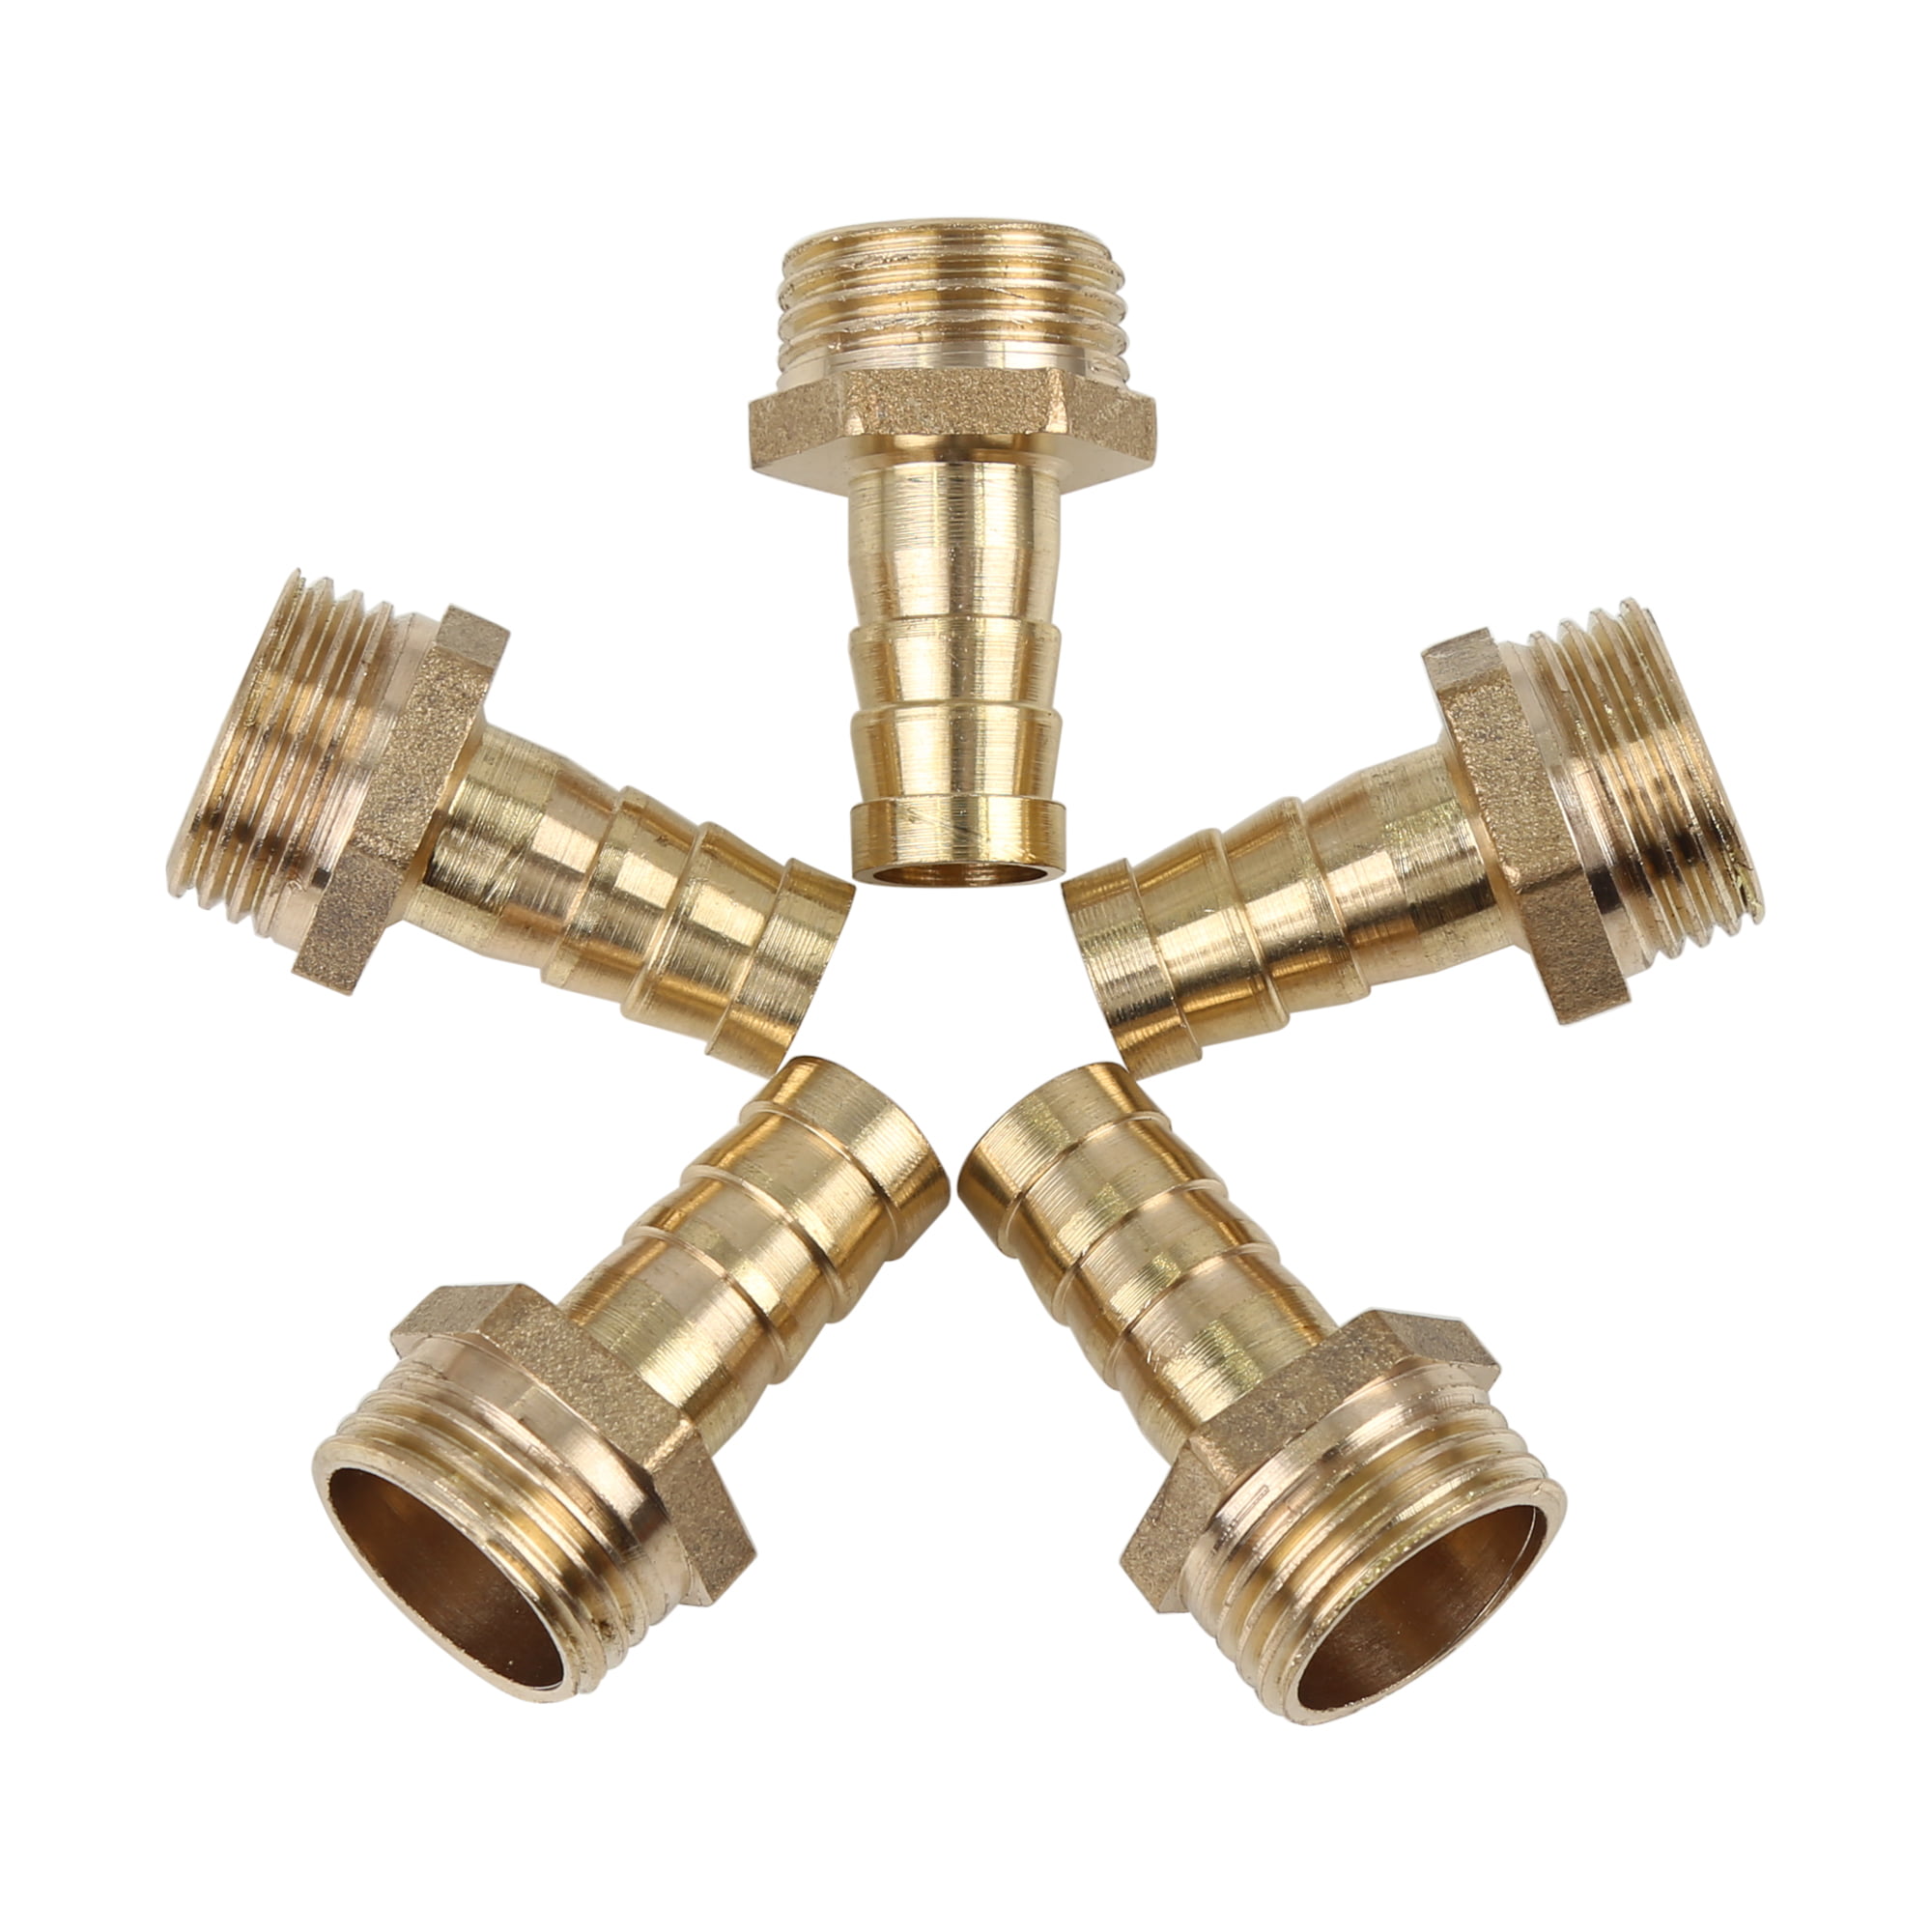 BRASS PIPE FITTING BARBED HOSETAIL JOINER TUBING CONNECTOR AIR WATER FUEL GAS 